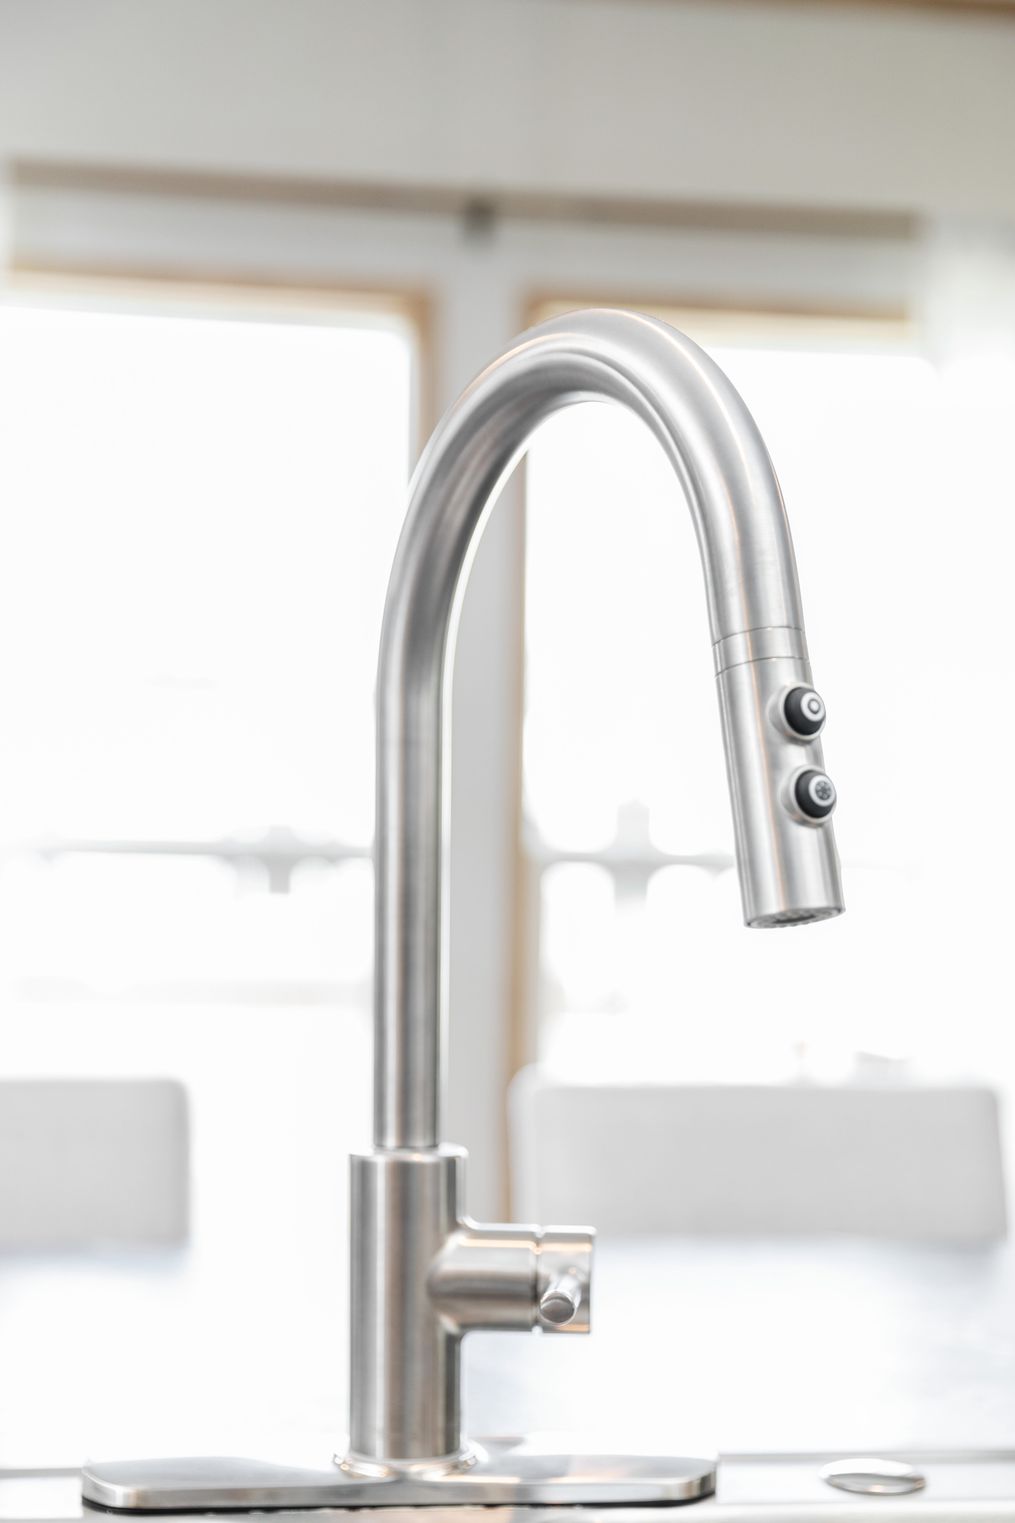 The EVEREST Features Pfister metal faucet with pull out sprayer. This Manufactured Mobile Home features 4 bedrooms and 2 baths.